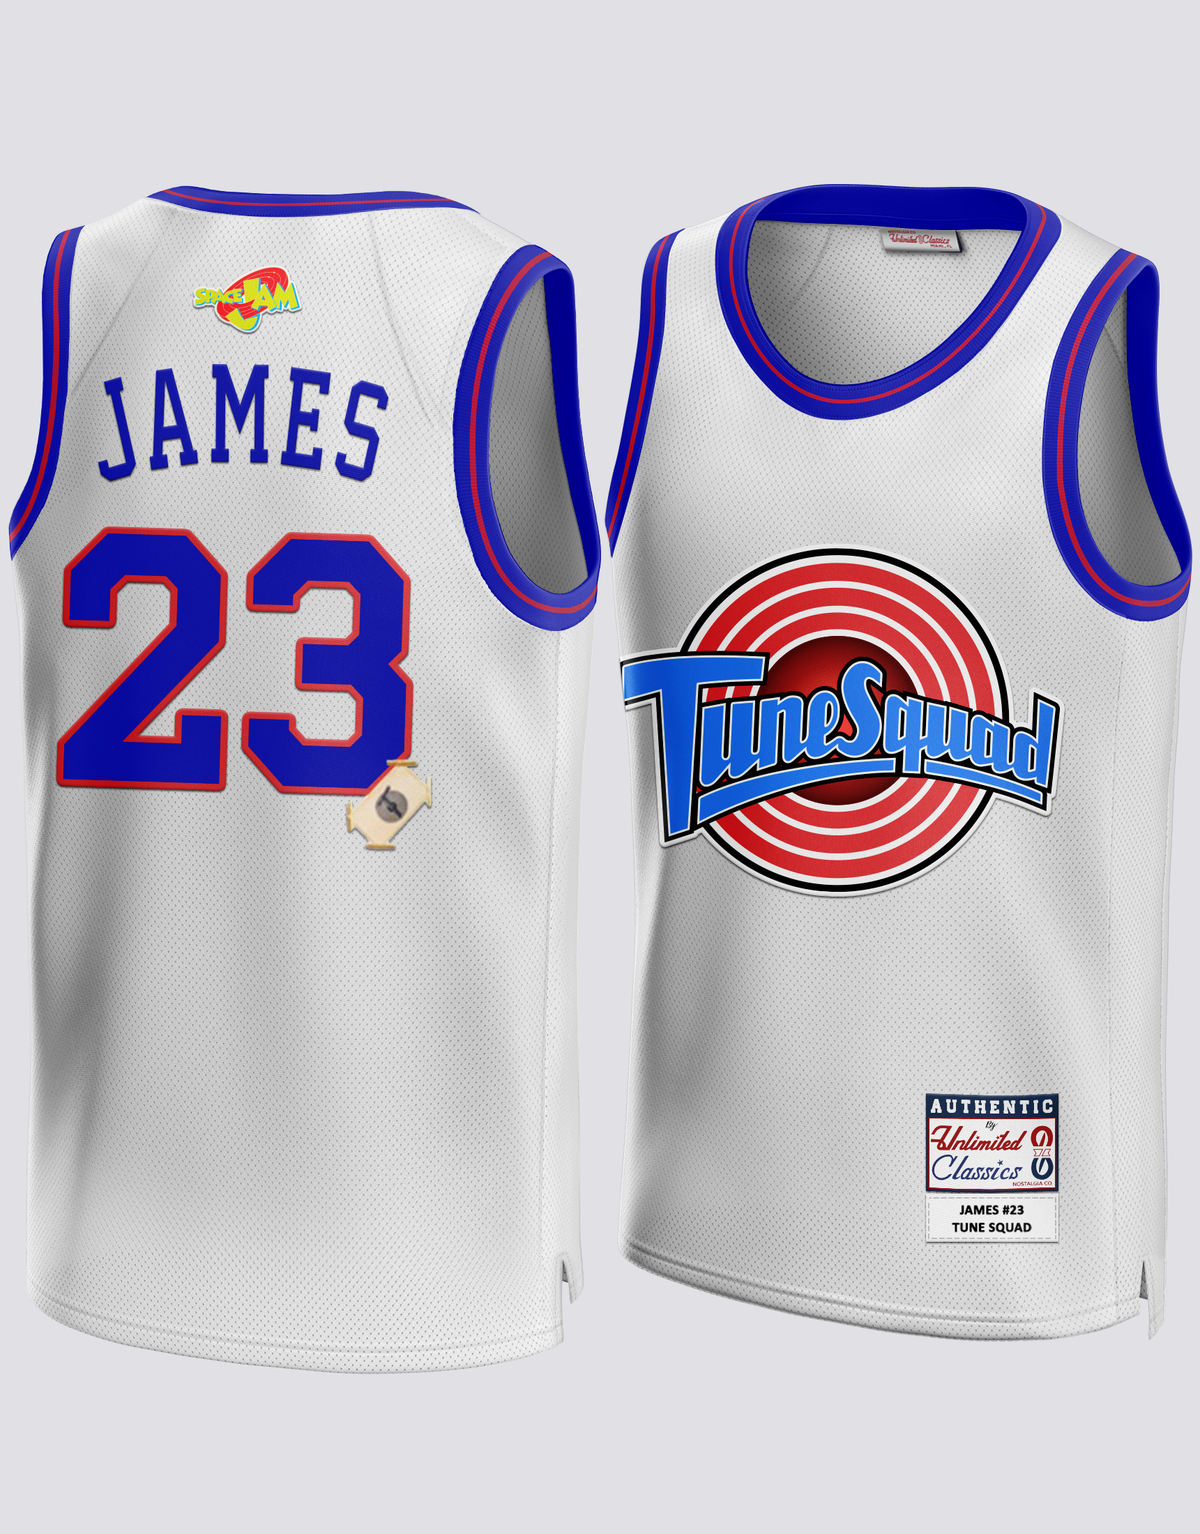 Tune Squad Basketball Outfit LeBron James In Space Jam: A